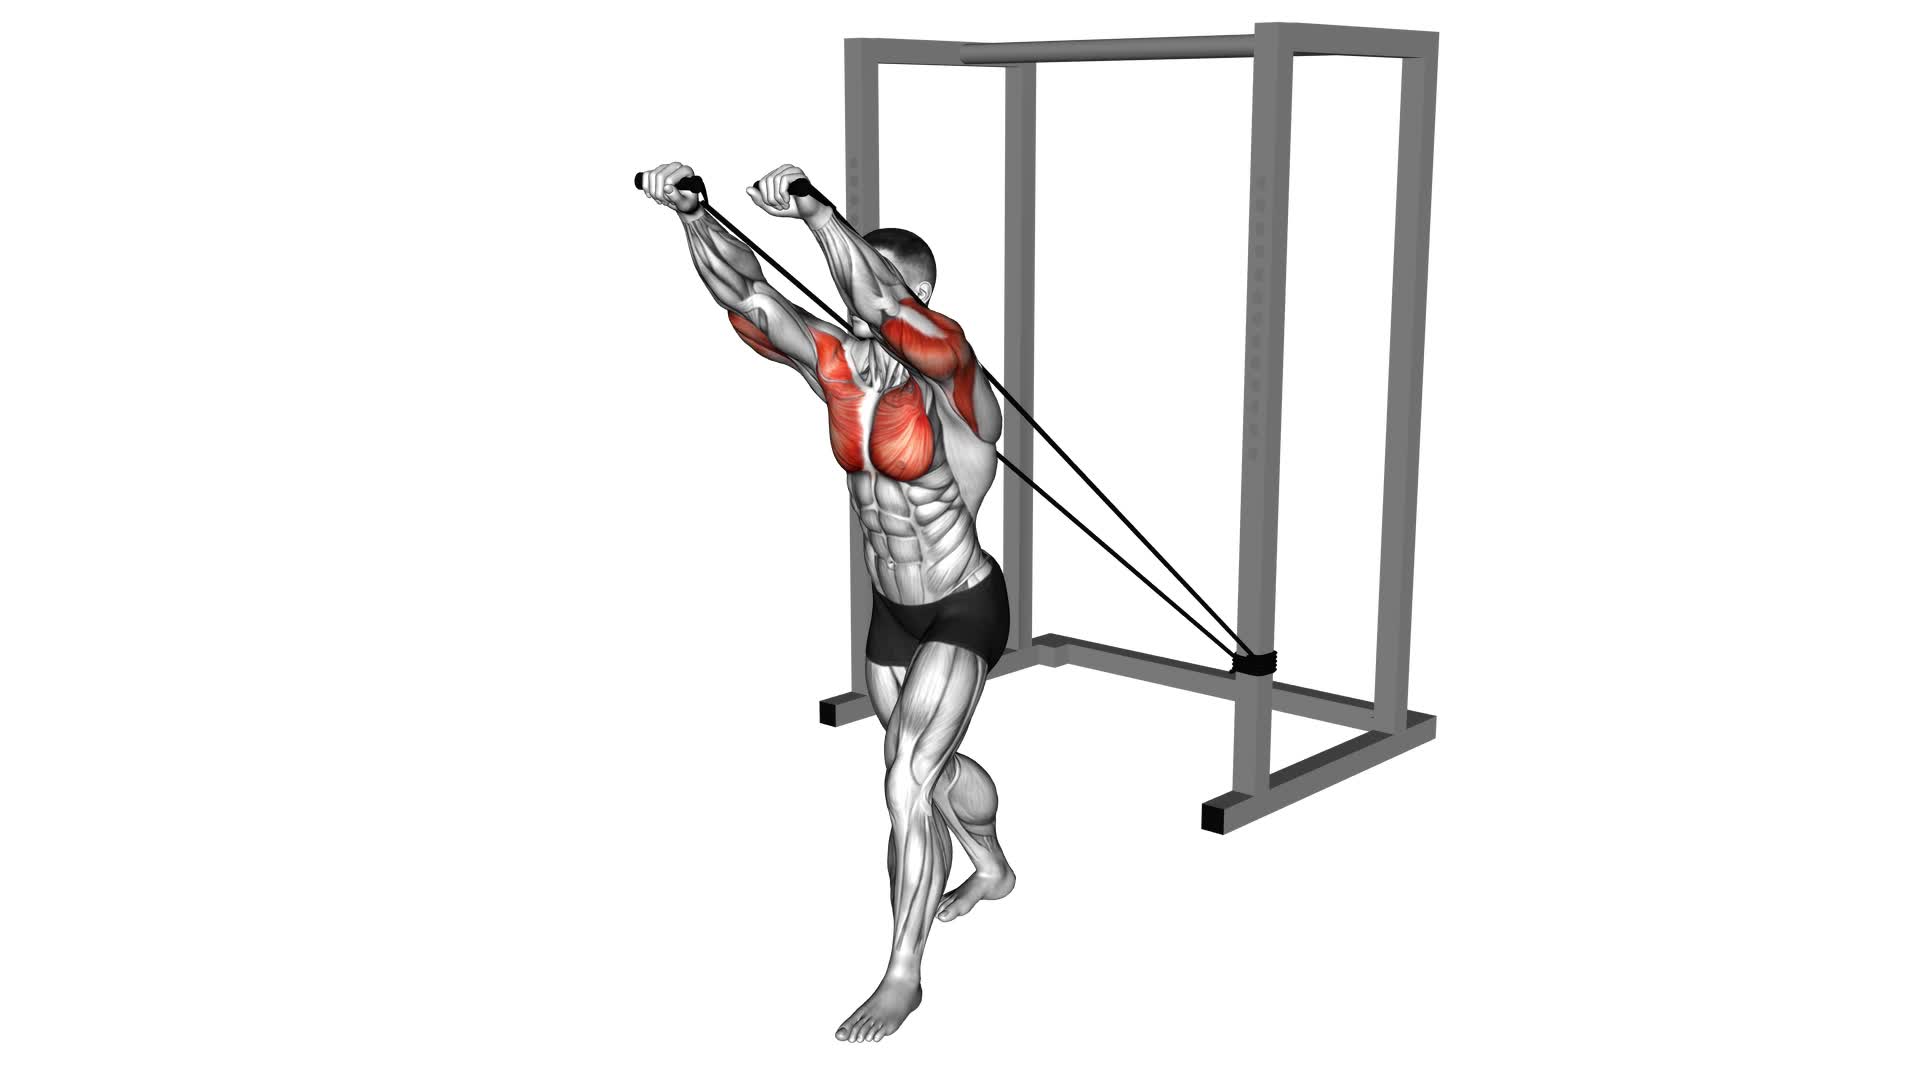 Band Incline Chest Press - Video Exercise Guide & Tips